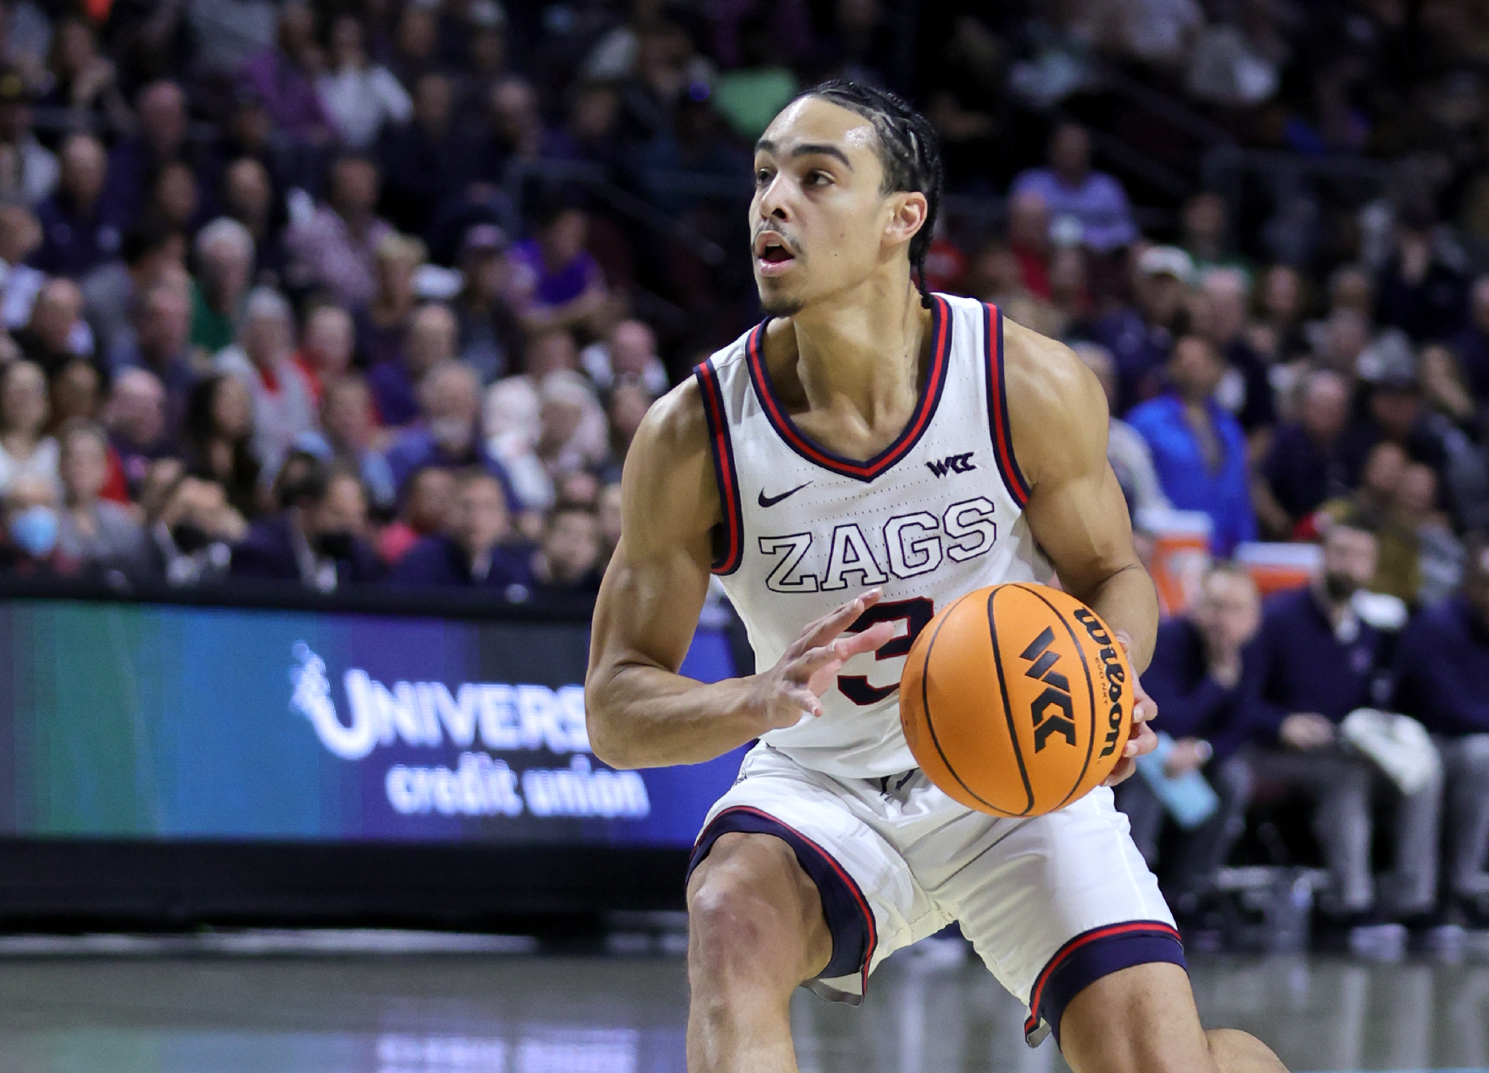 Andrew Nembhard wearing a Zags jersey on the court.